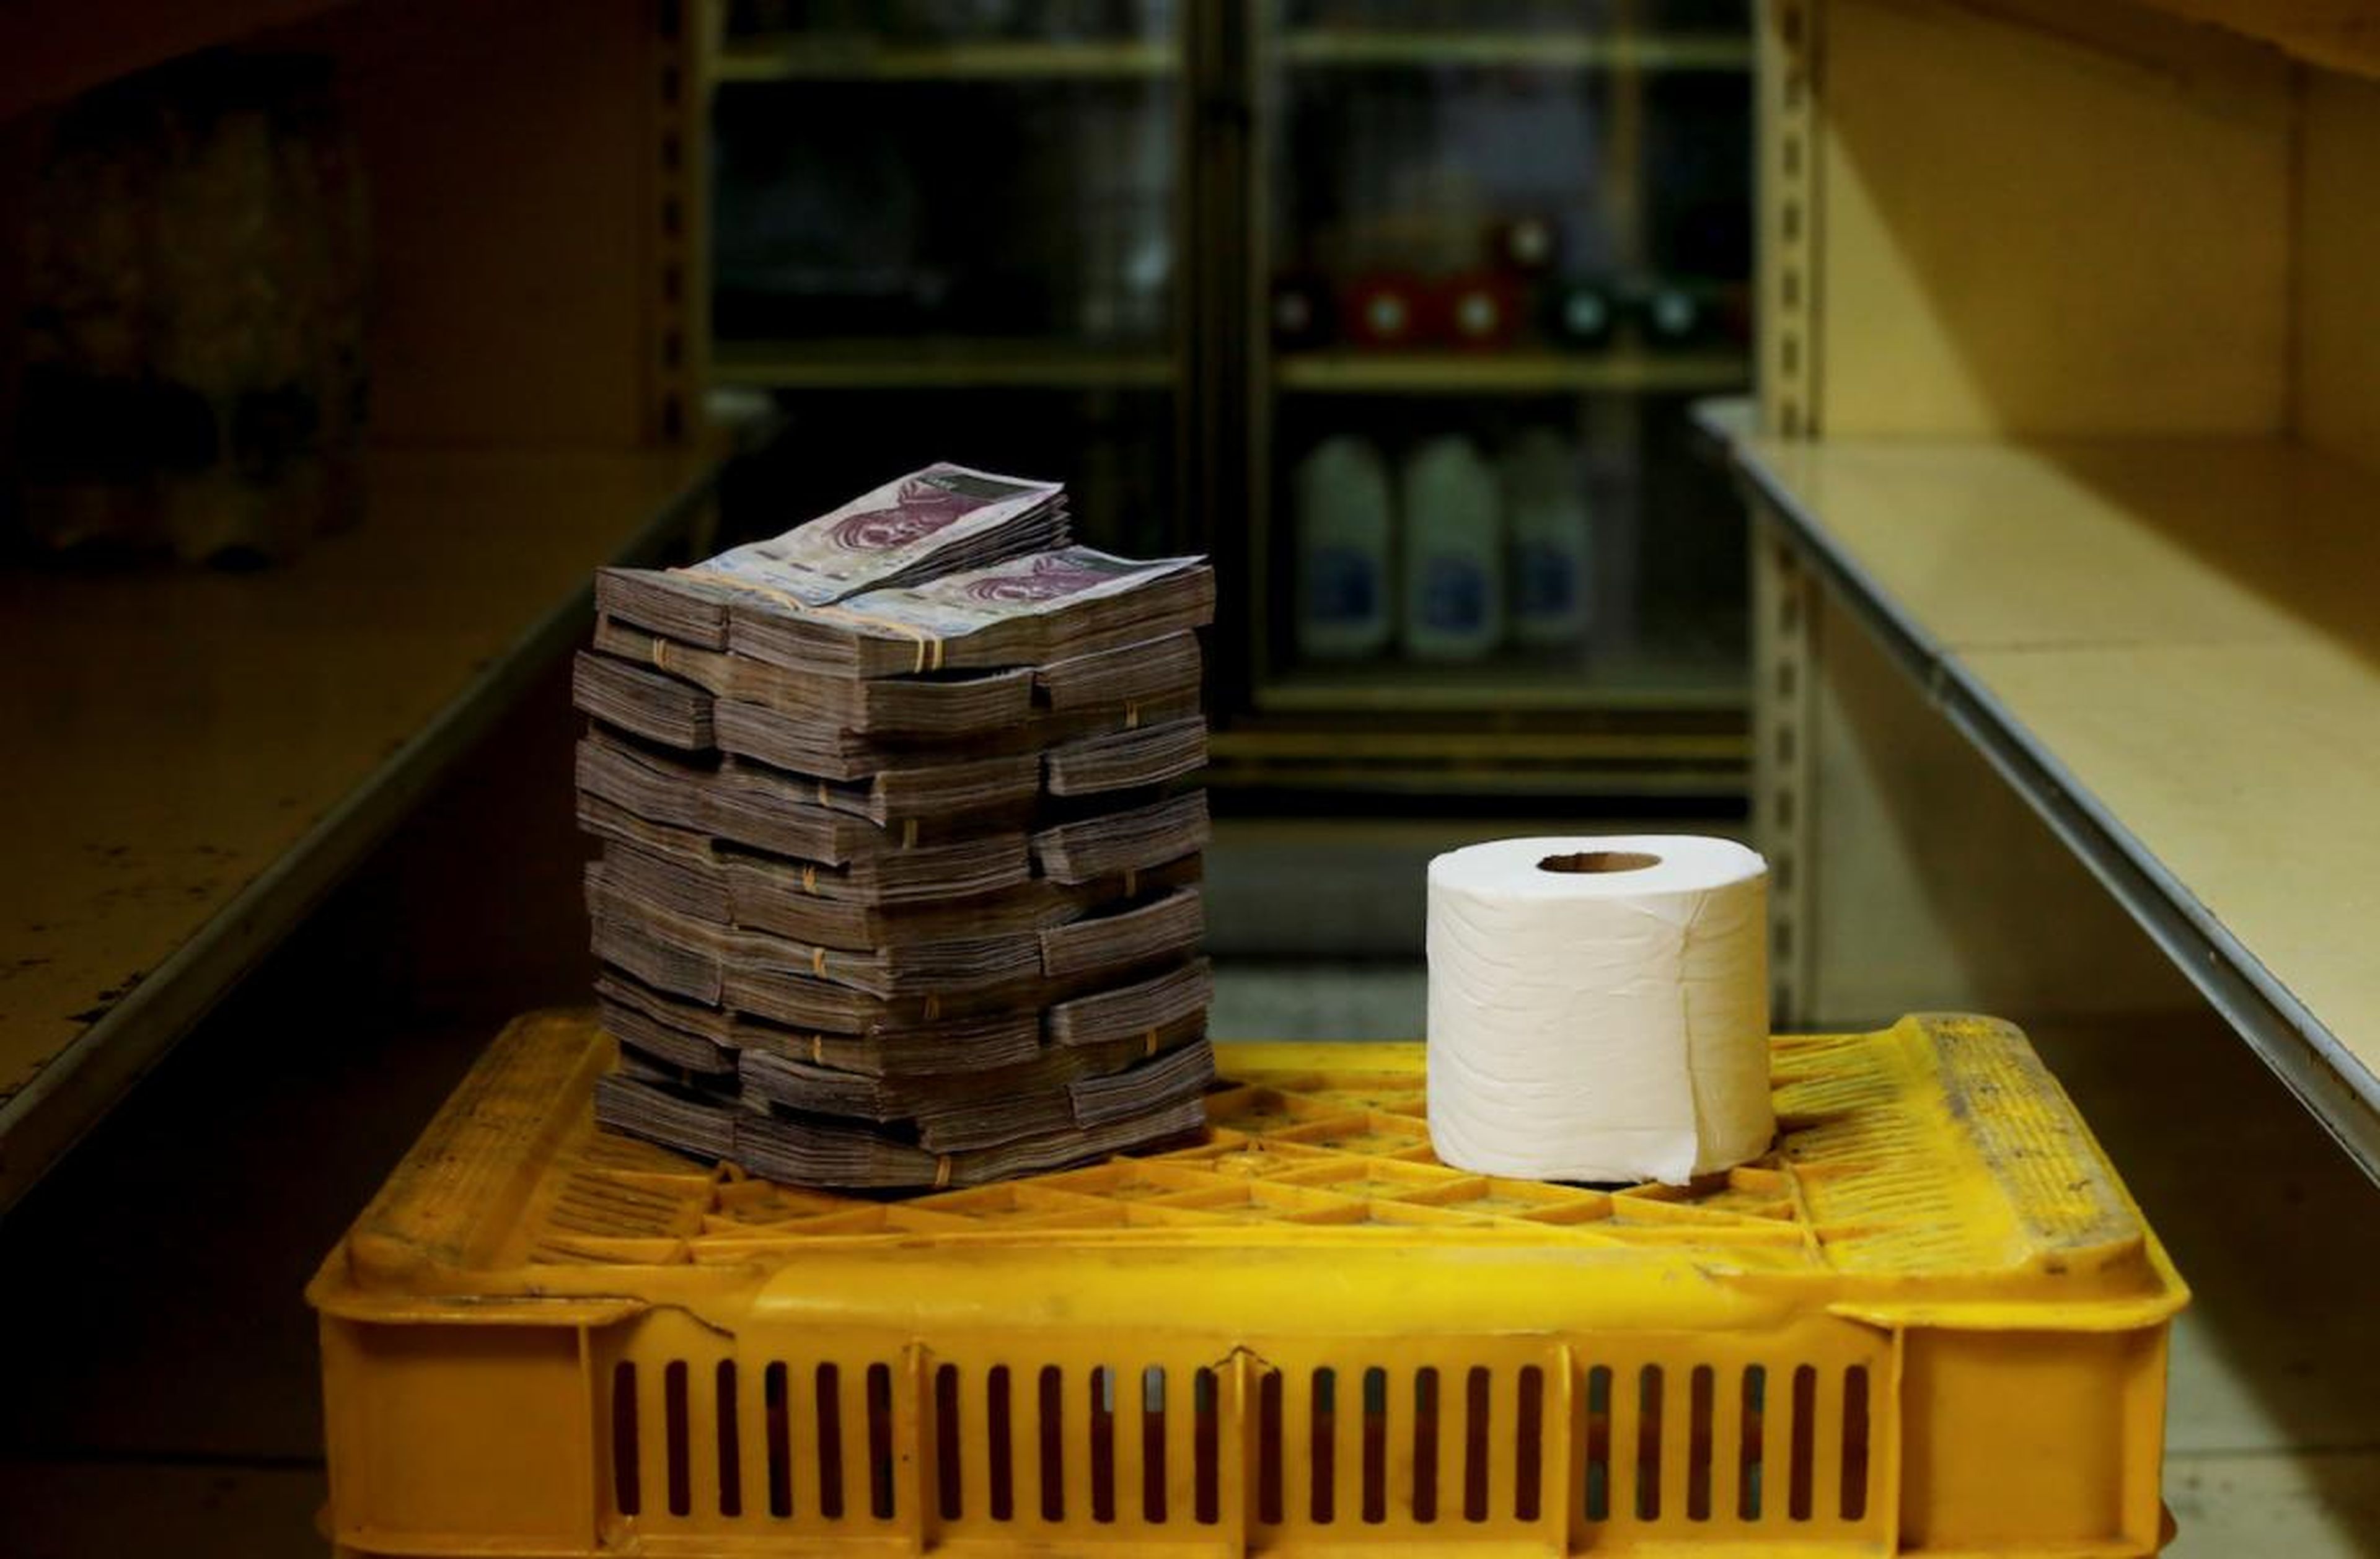 A toilet paper roll is pictured next to 2,600,000 bolivars, its price and the equivalent of 0.40 USD, at a mini-market in Caracas, Venezuela.